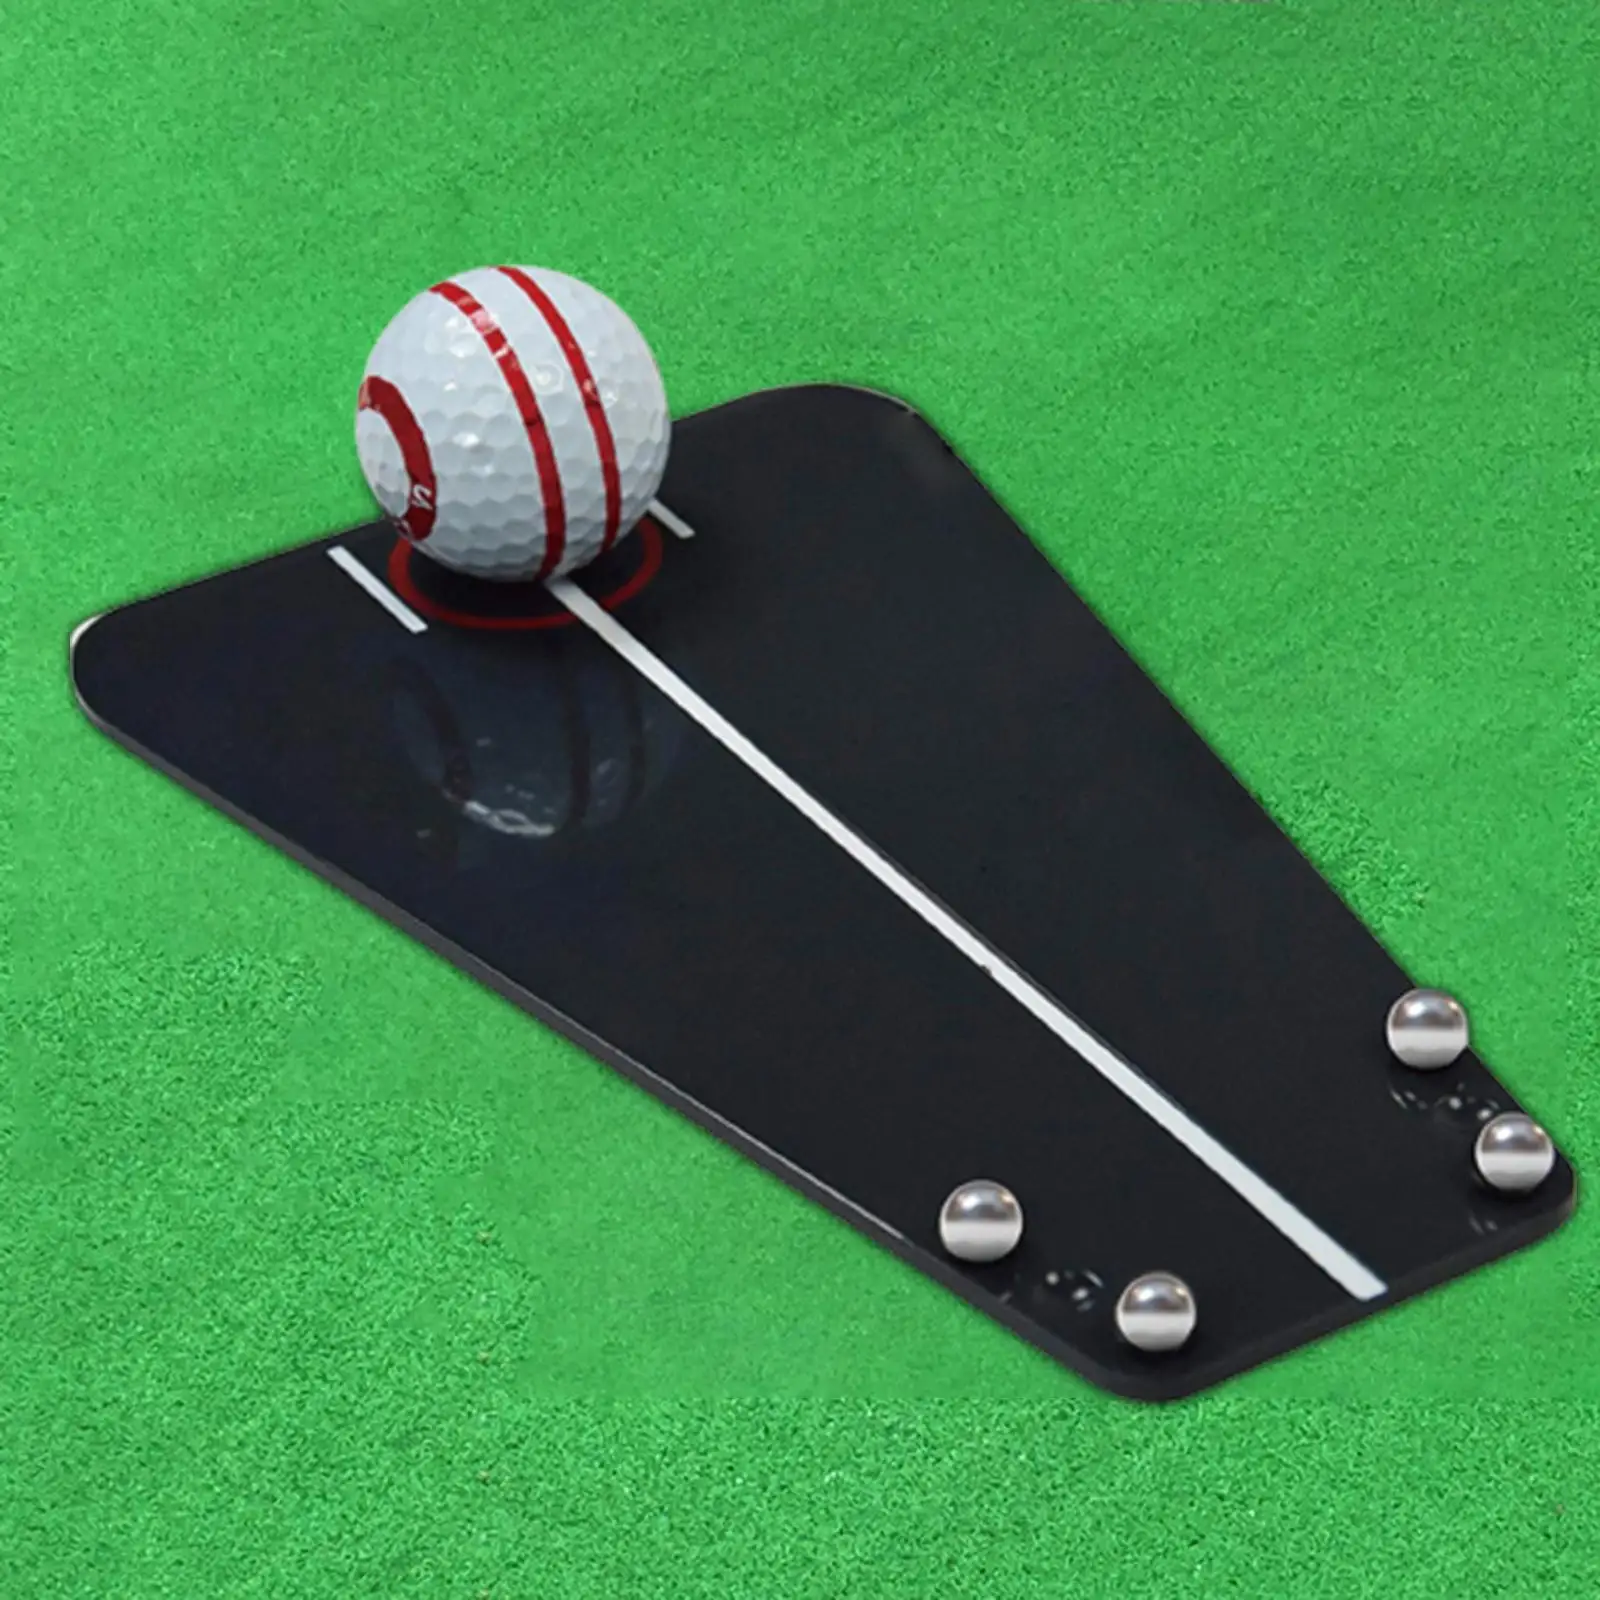 Golf Putting Tutor Swing Trainer Practice Portable Golf Putting Aid Improve Putting Skills for Indoor Outdoor Sports